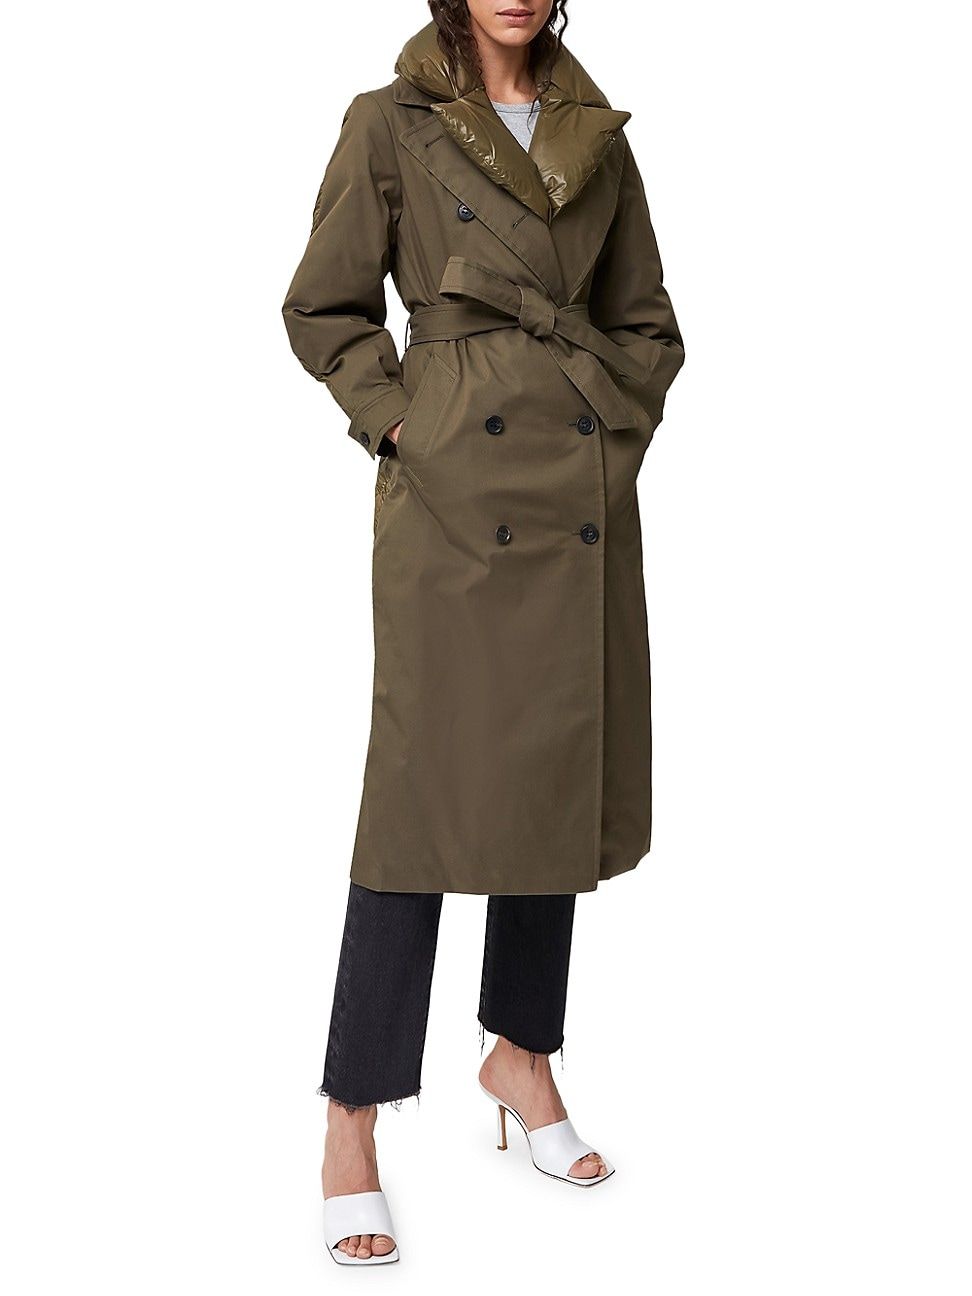 Mackage Women's Sage Double-Breasted Down Trench Coat - Army - Size Large | Saks Fifth Avenue